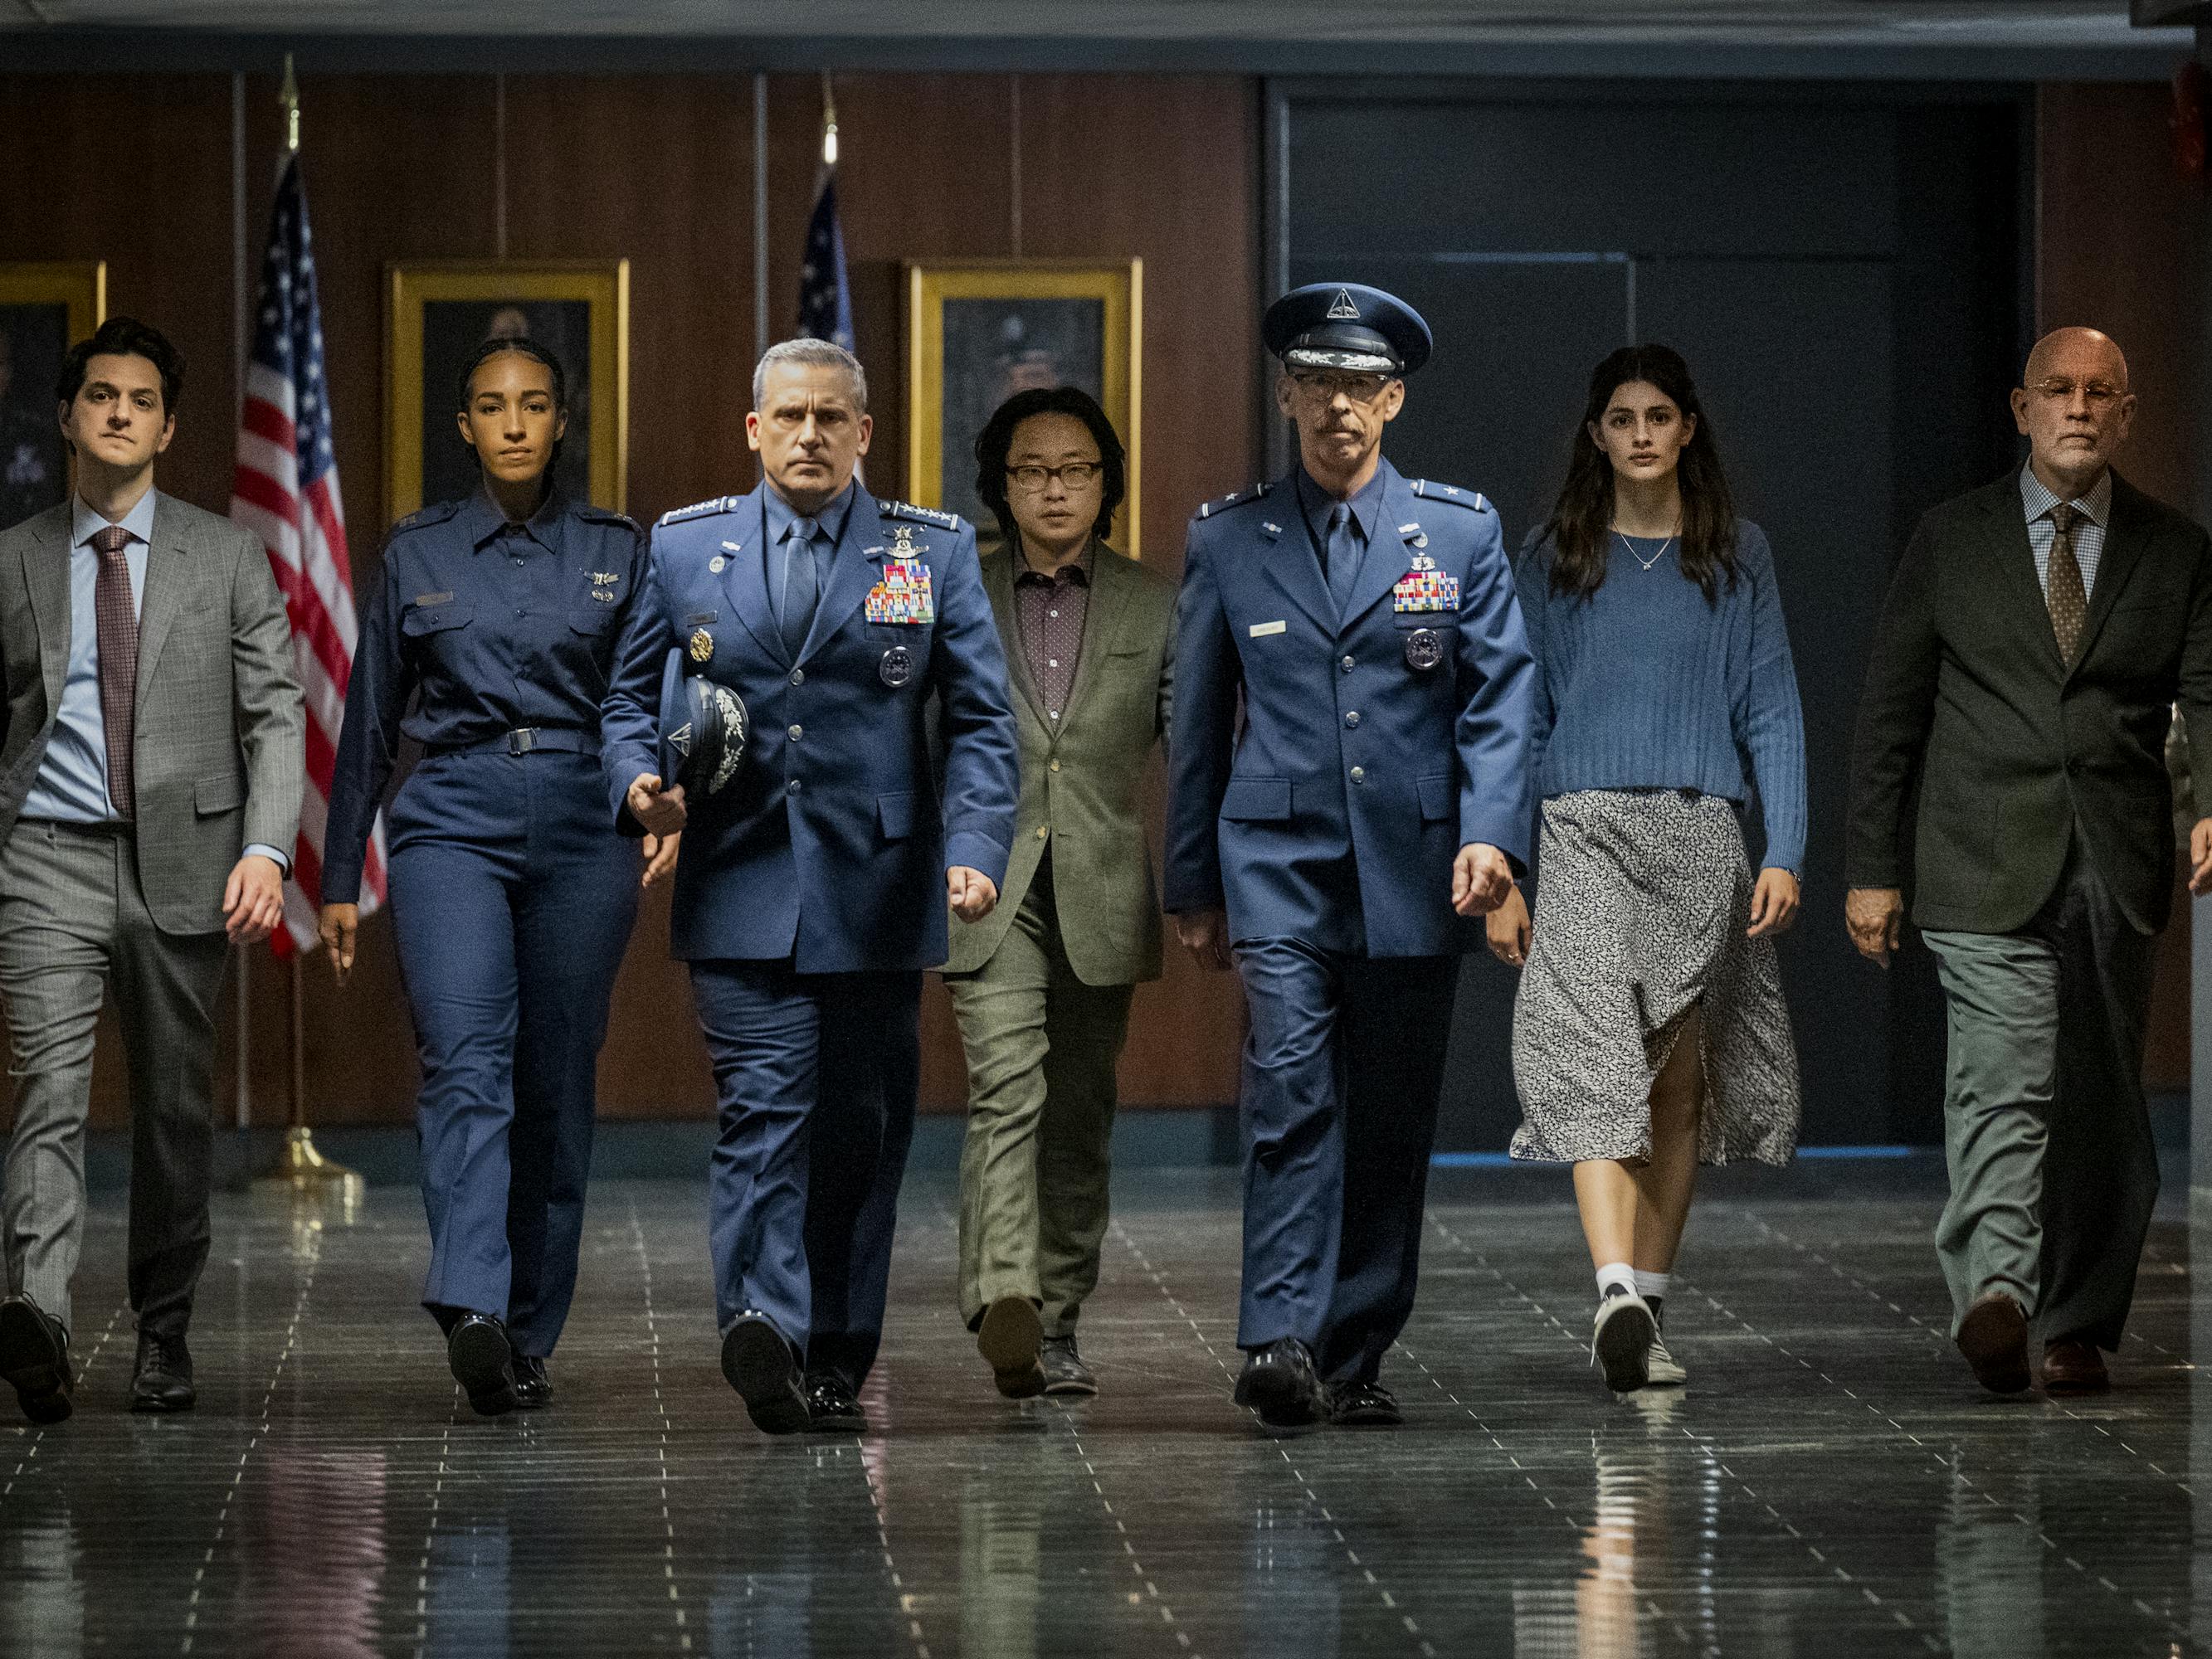 Ben Schwartz, Tawny Newsome, Steve Carell, Jimmy O. Yang, Don Lake, Diana Silvers, and John Malkovich walk down an empty hallway. Some of the men are wearing uniforms, and they all look serious. 